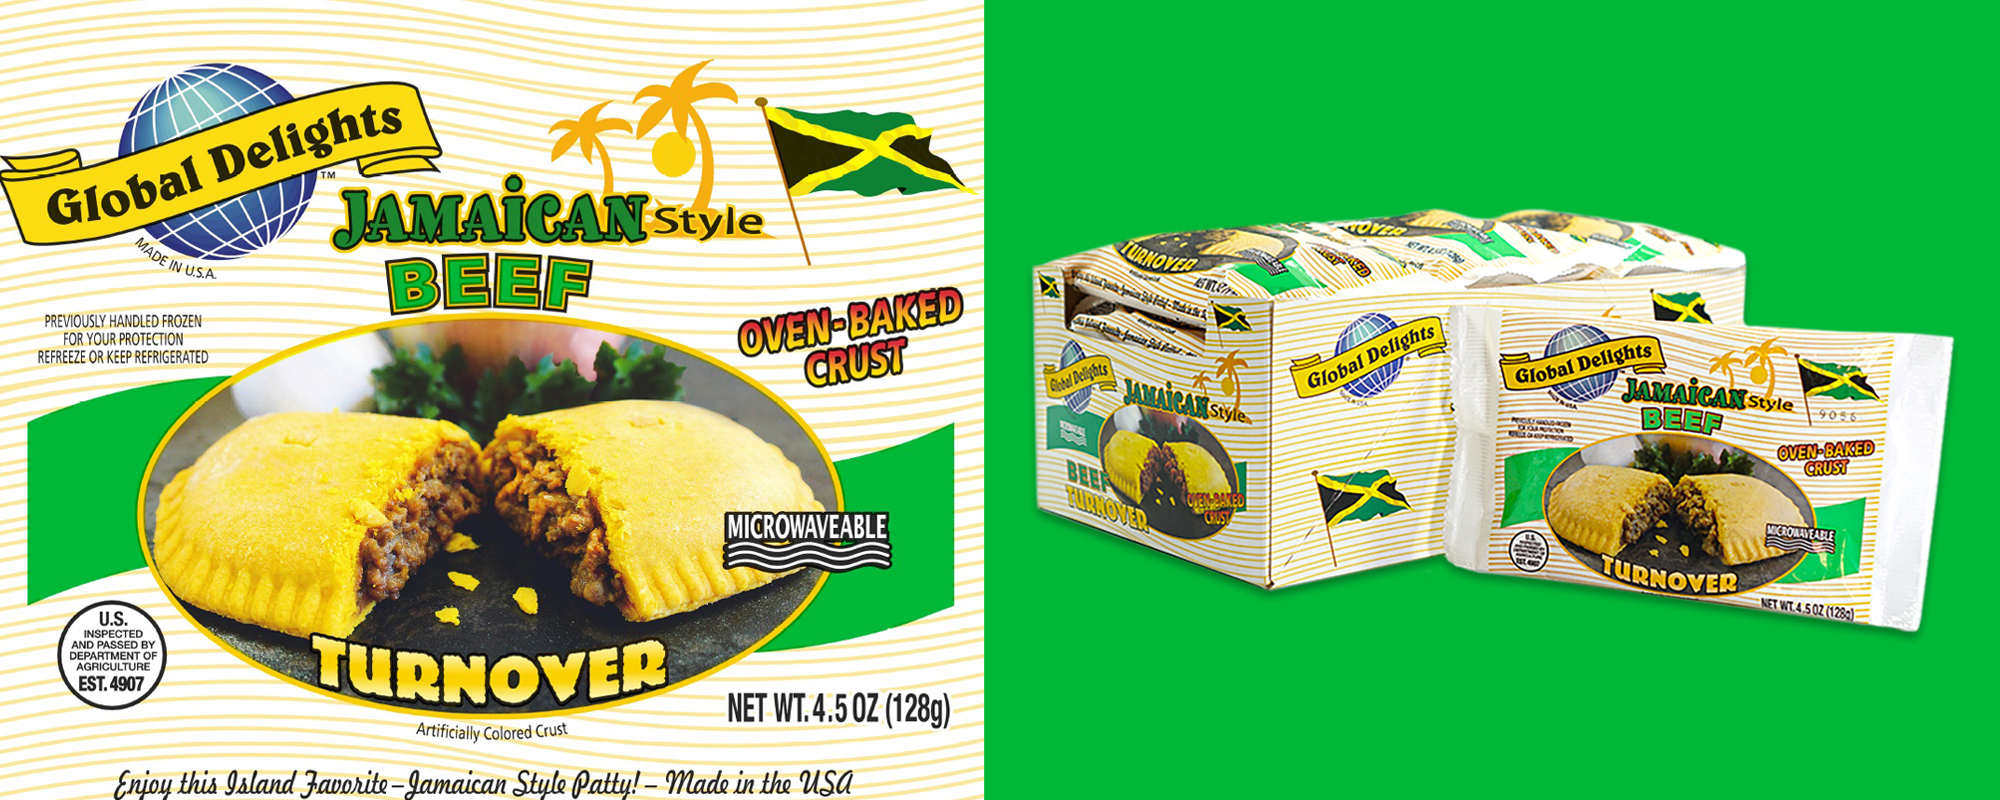 Jamaican Style Beef Turnover - Caribbean Products